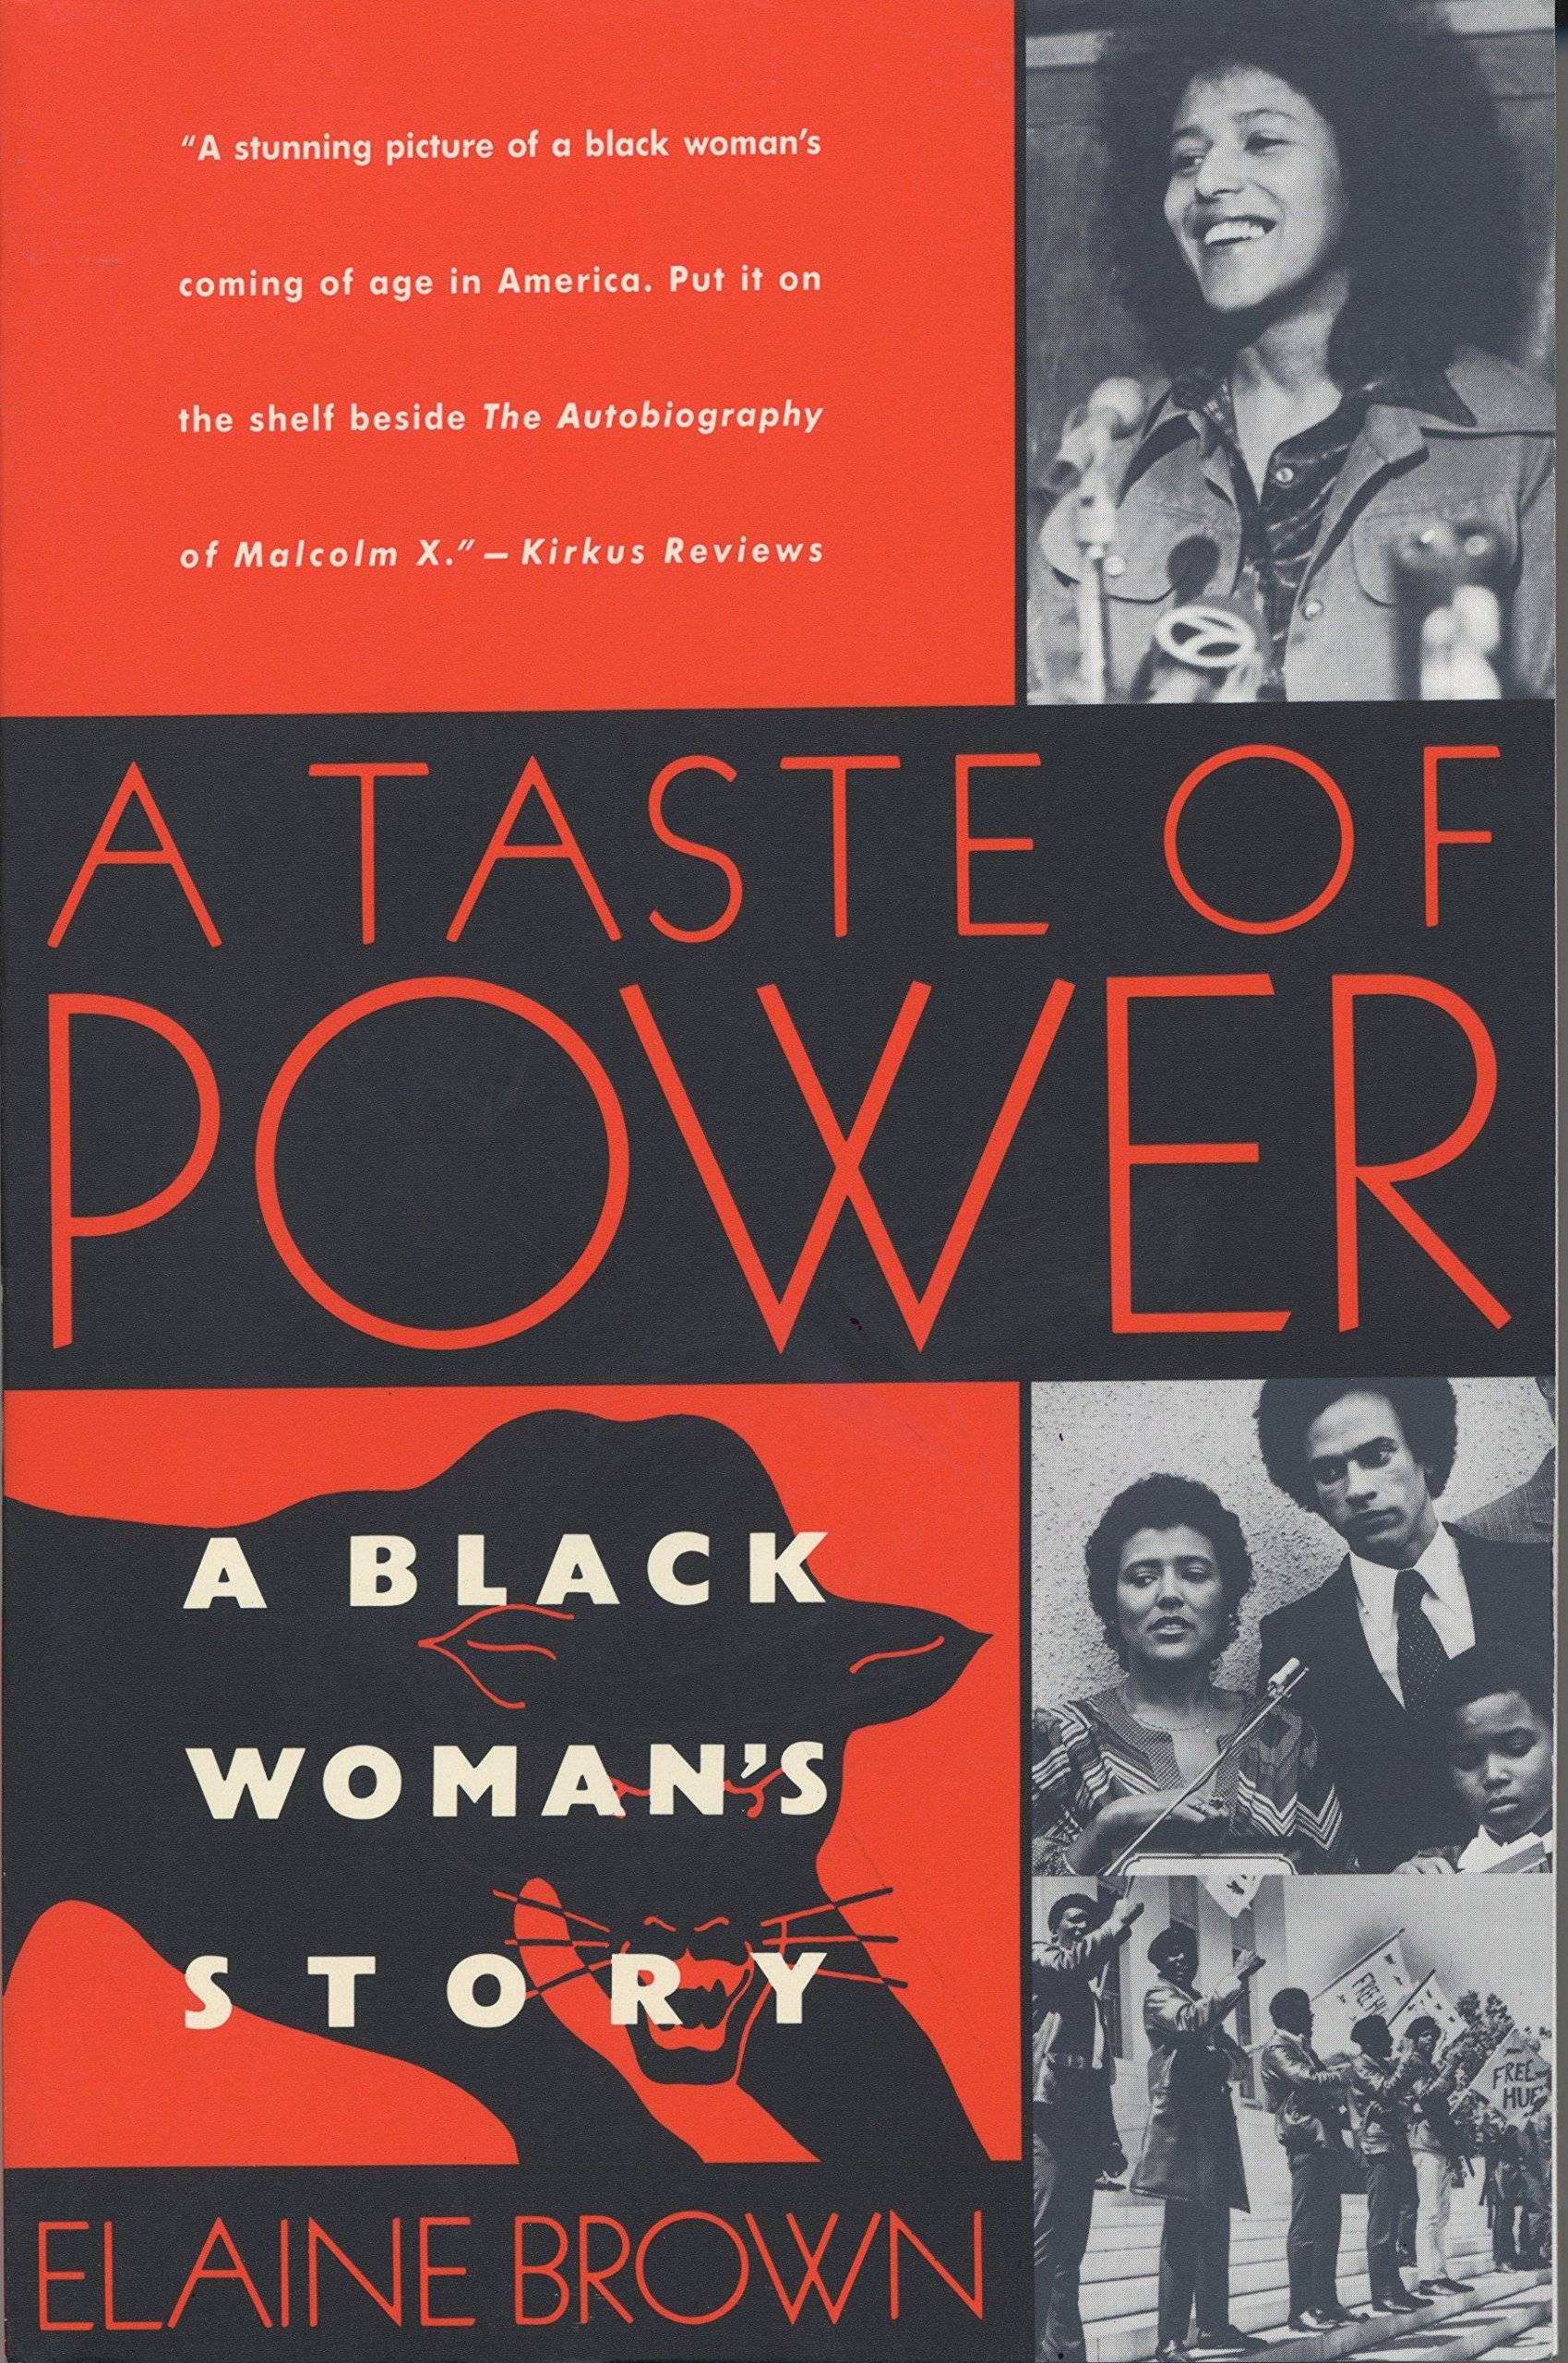 Black and red cover with black and white photos of women, protestors, and a black panther